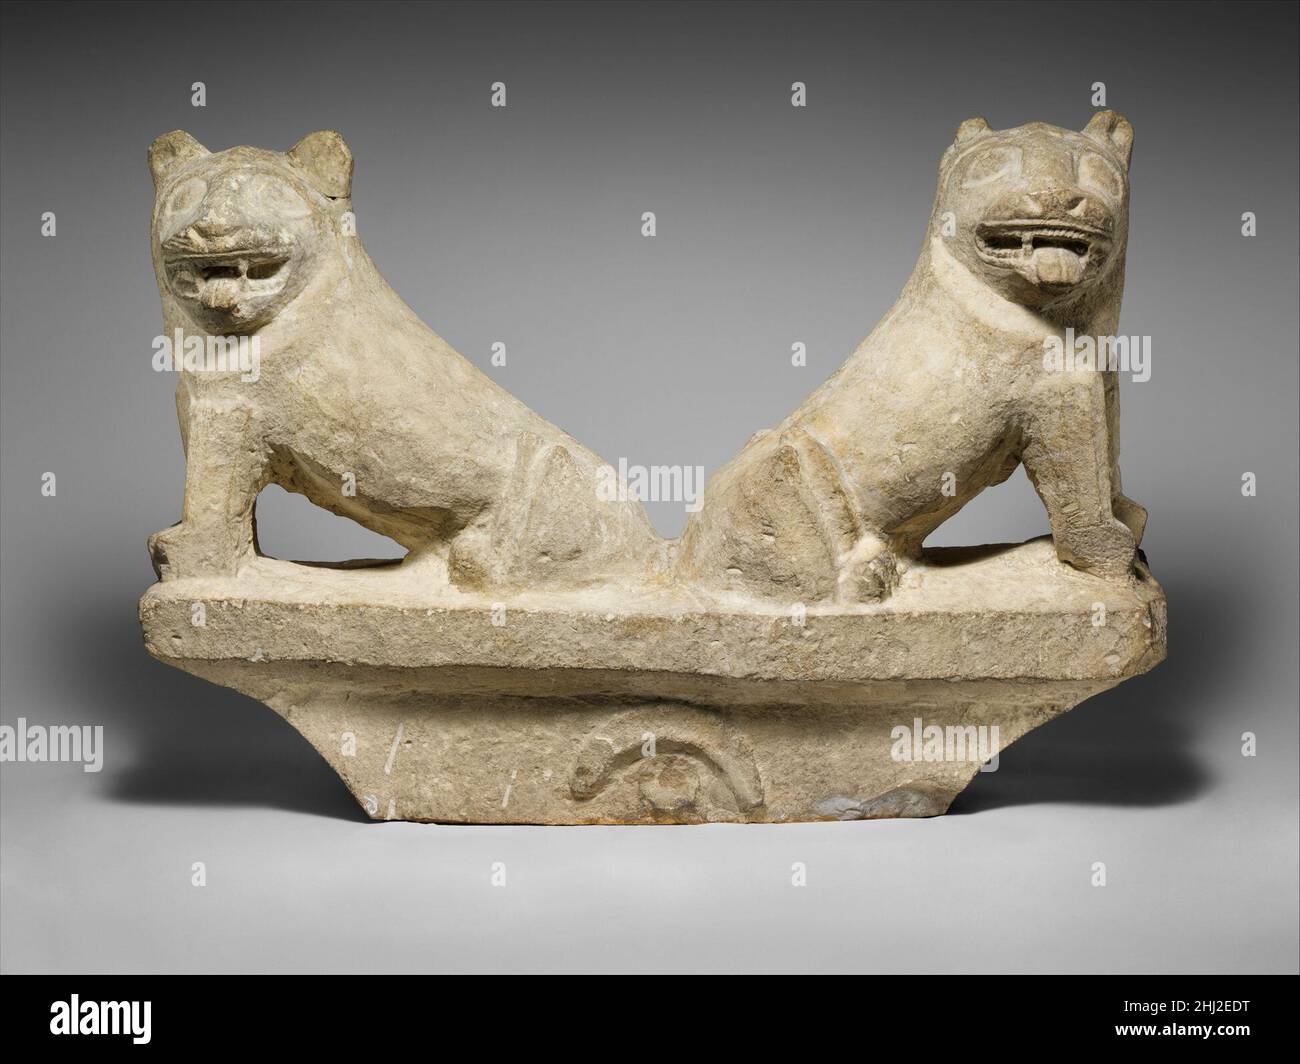 Limestone finial of a funerary stele with two seated lions ca. 550–526 B.C. Cypriot Two lions sit back to back on a cavetto finial decorated with a disk and a crescent, the points of which turn downward. The lions’ heads are turned toward the viewer, their mouths open and tongues extended.. Limestone finial of a funerary stele with two seated lions  242415 Stock Photo